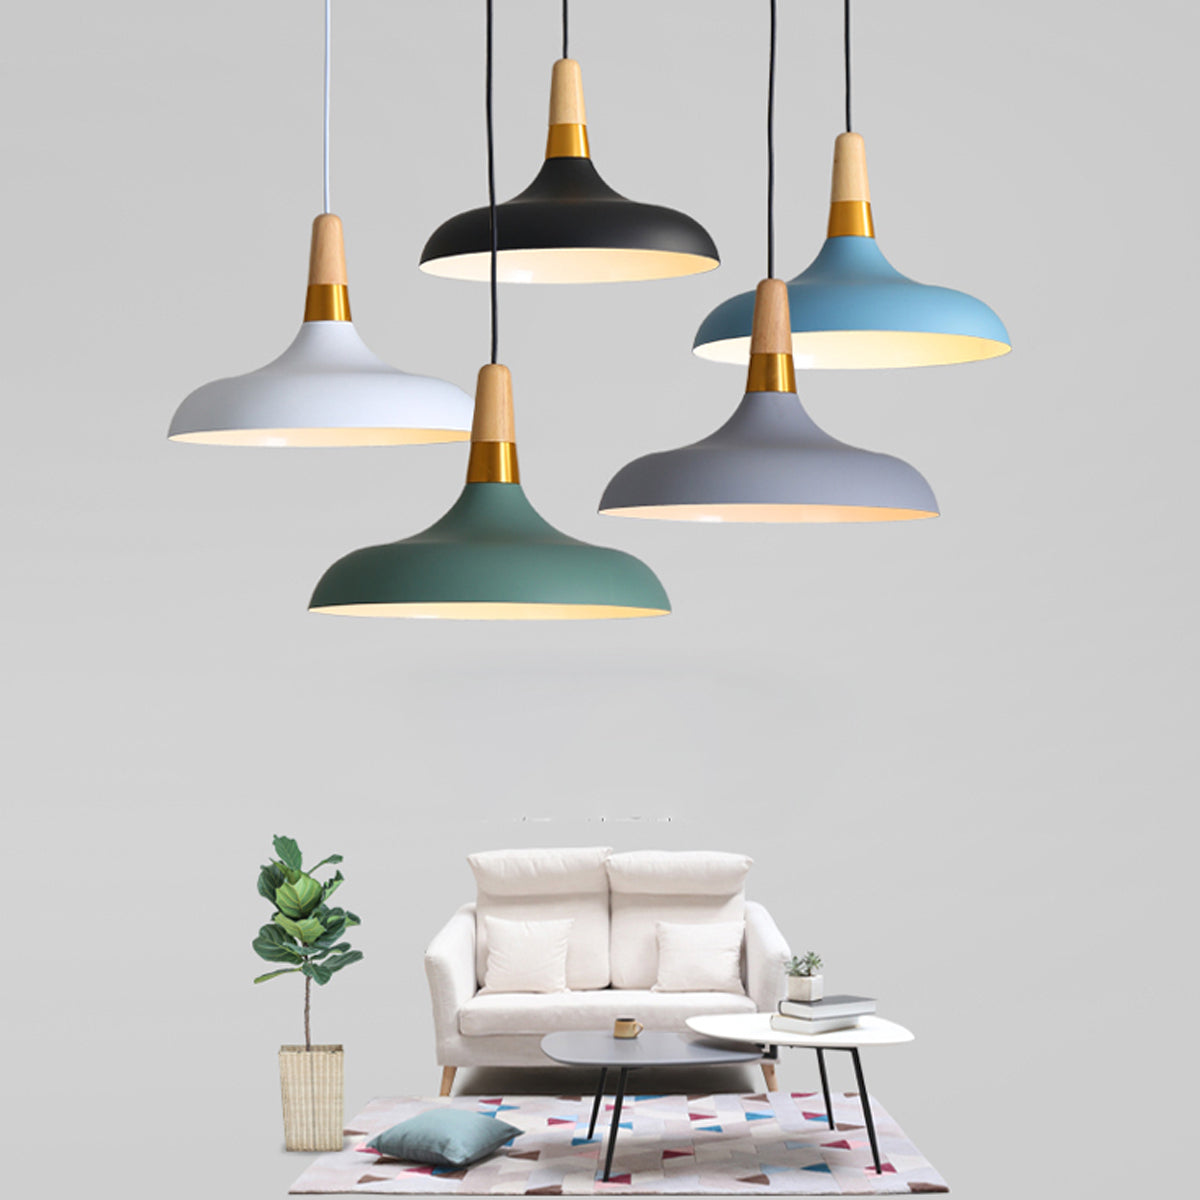 Comes in a choice of 4  colours. The Esther Pendant is a stylish modern metal ceiling light finished in Marine blue with a white inner.  Complete with a gold and wooden cap detail attached to a white adjustable cable and matching matt ceiling rose